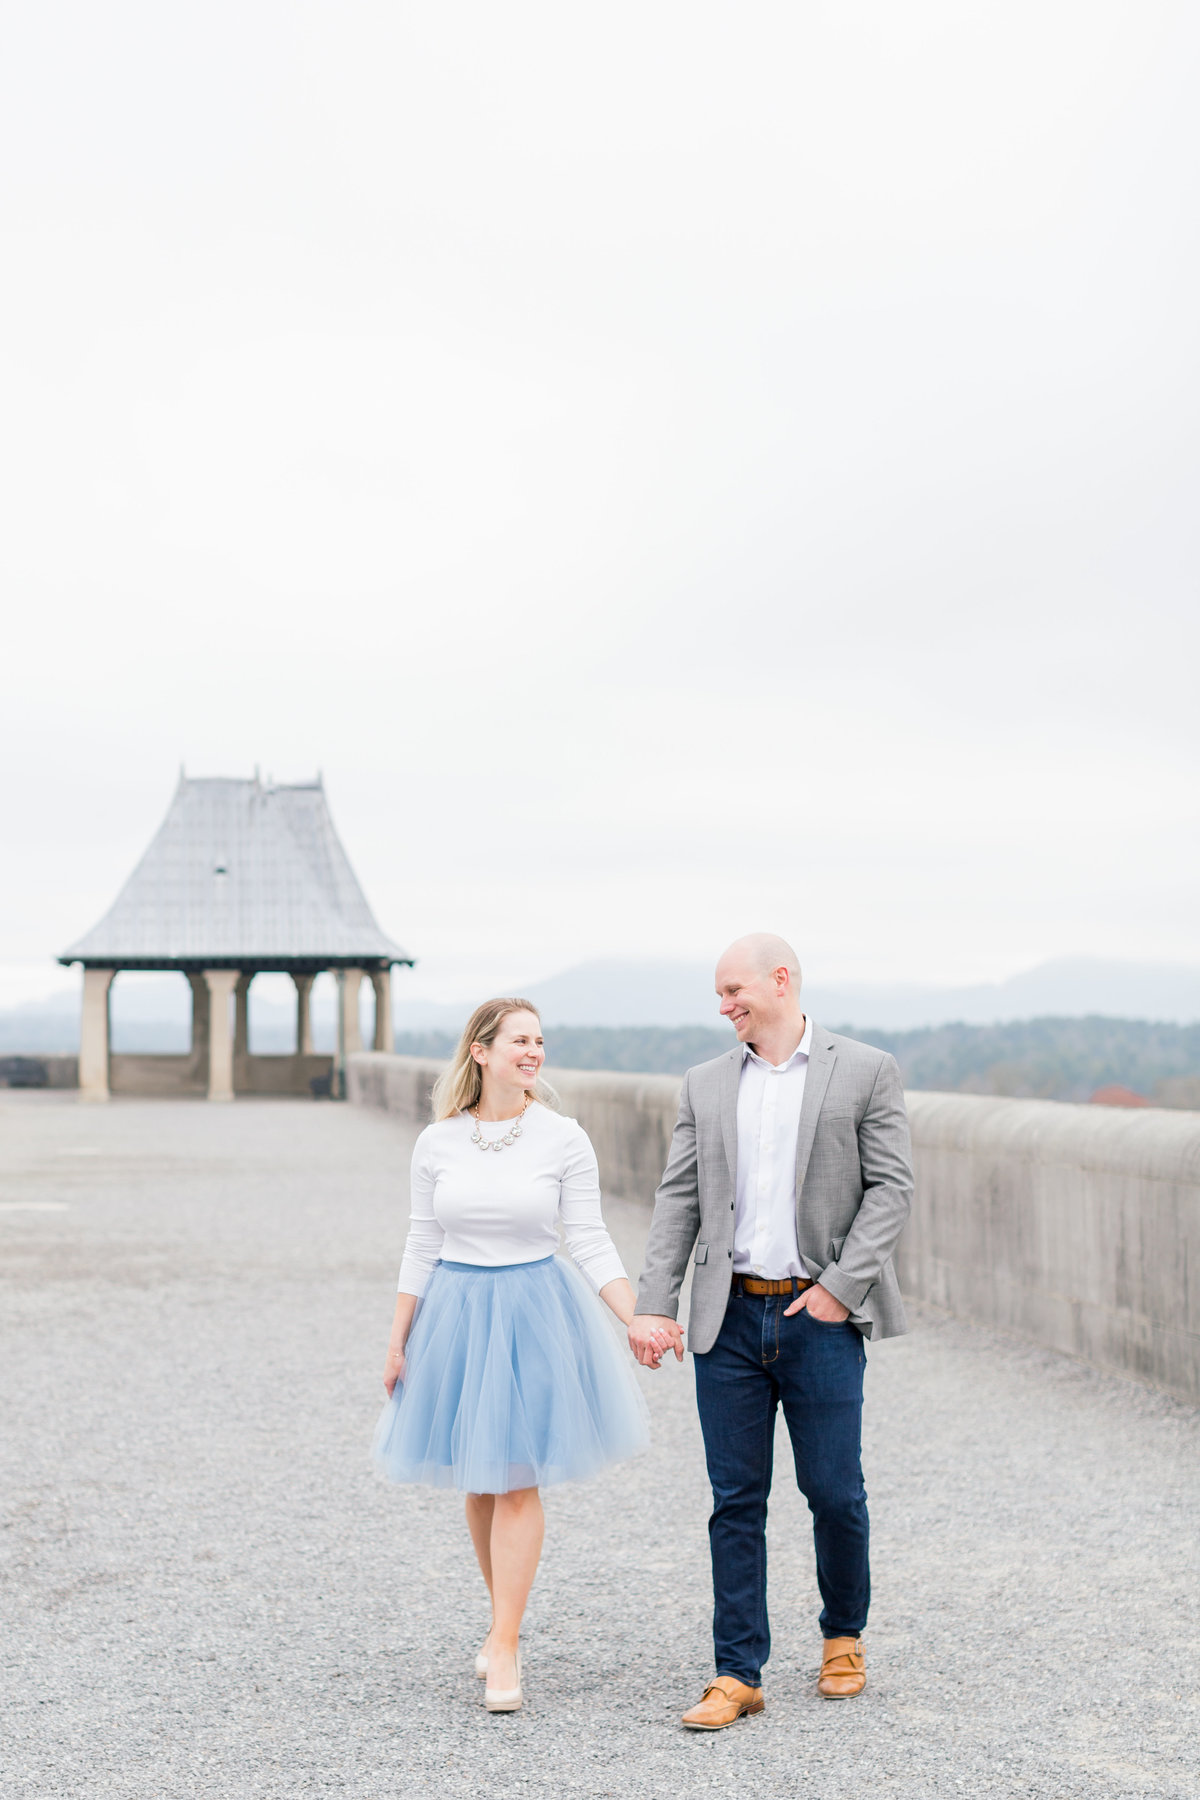 Ben and Brittany Engaged-Samantha Laffoon Photography-120